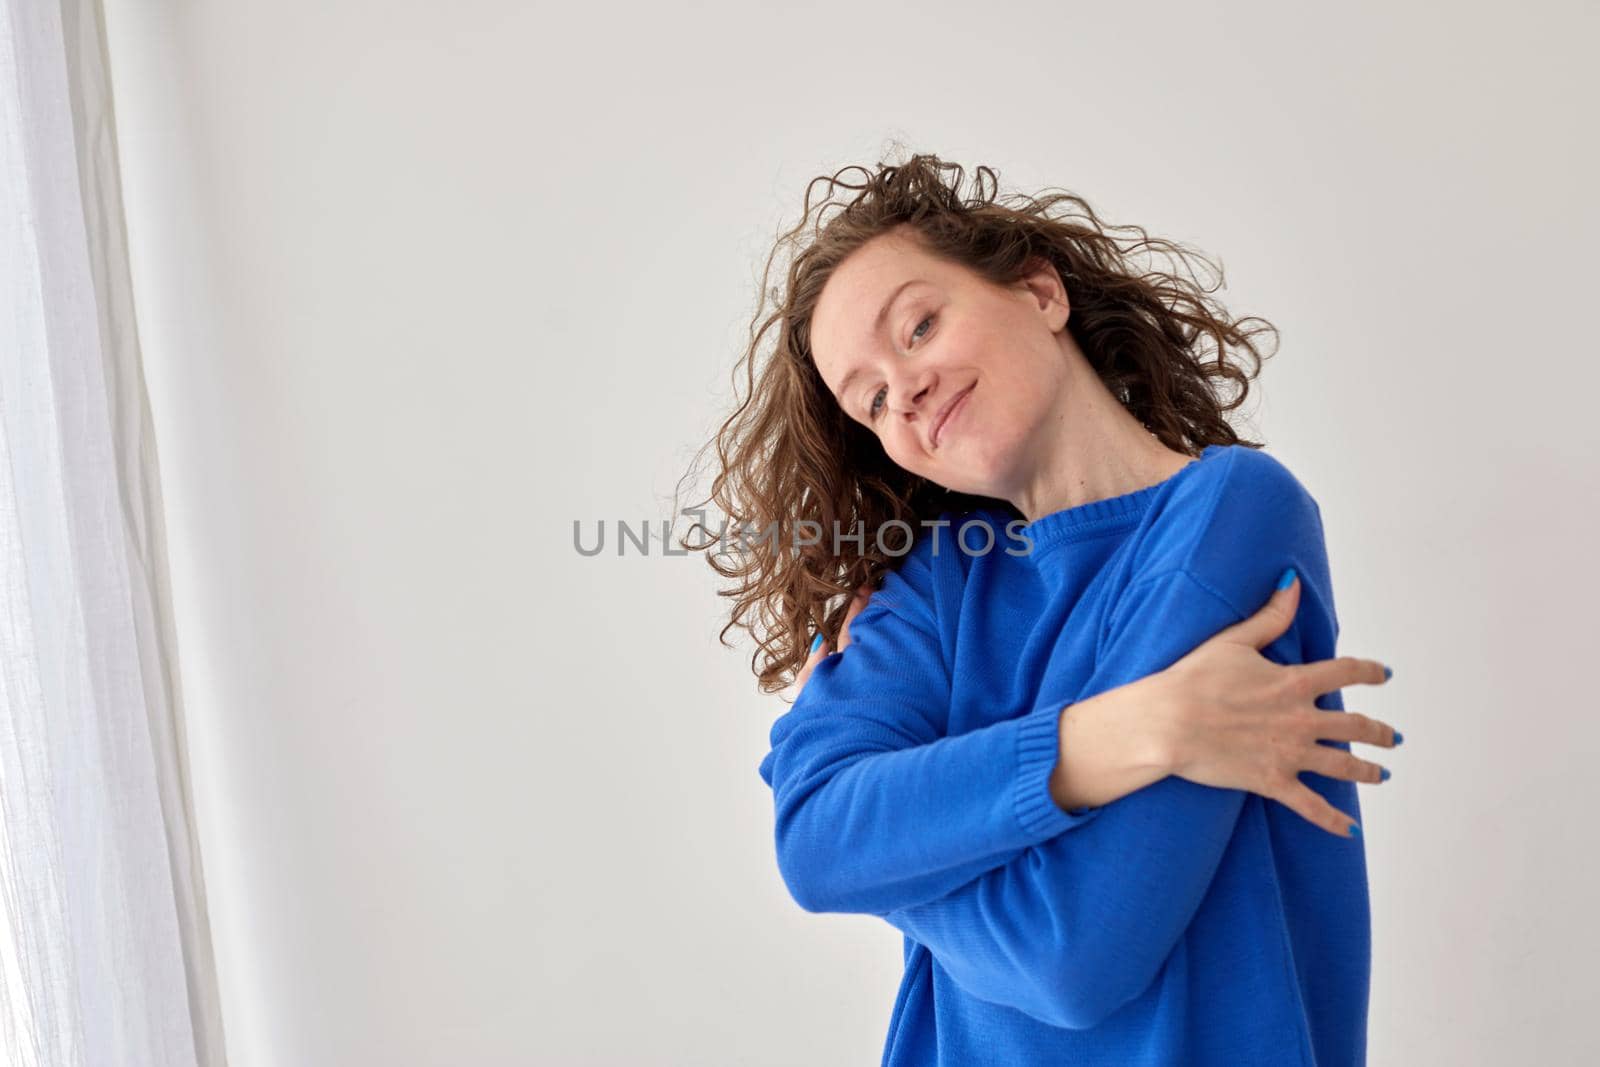 Self hug of happy confident young woman against white wall background by Demkat